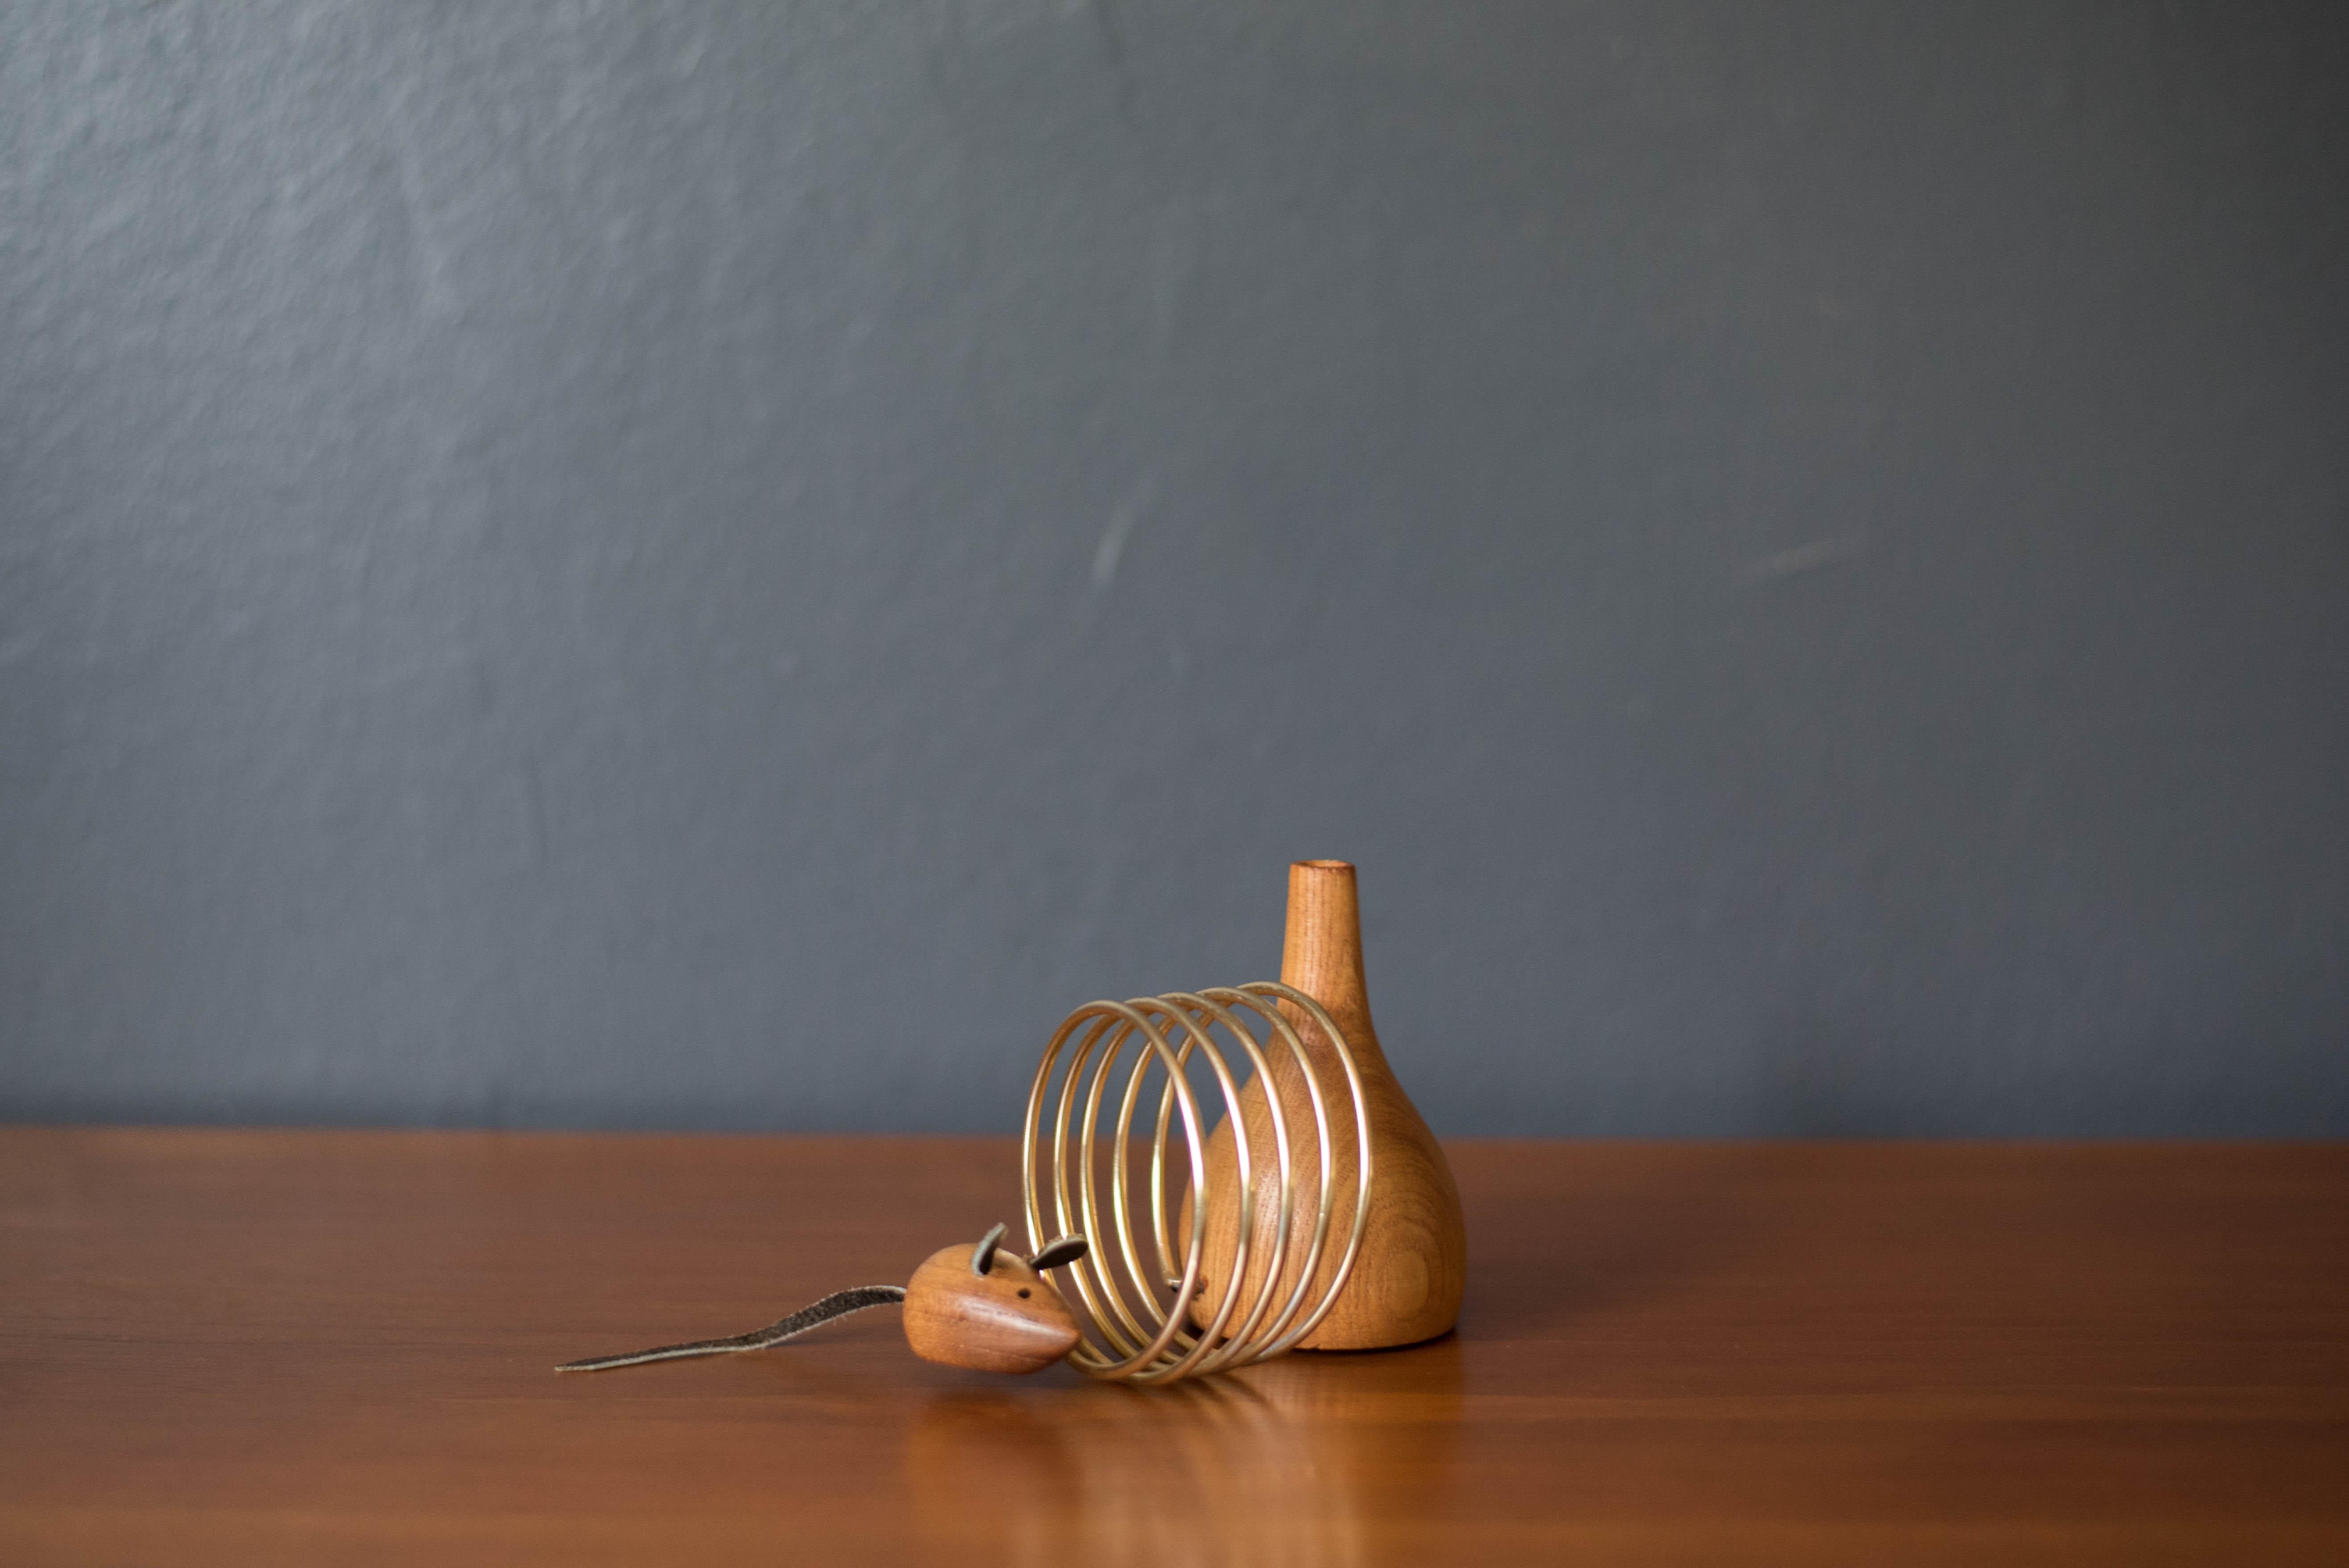 Mid century modern organizing letter holder circa 1960's. This unique piece features a teak vase pen holder and mouse sculpture accessorized with leather ears and a tail. Perfect for filing mail or office paperwork. 